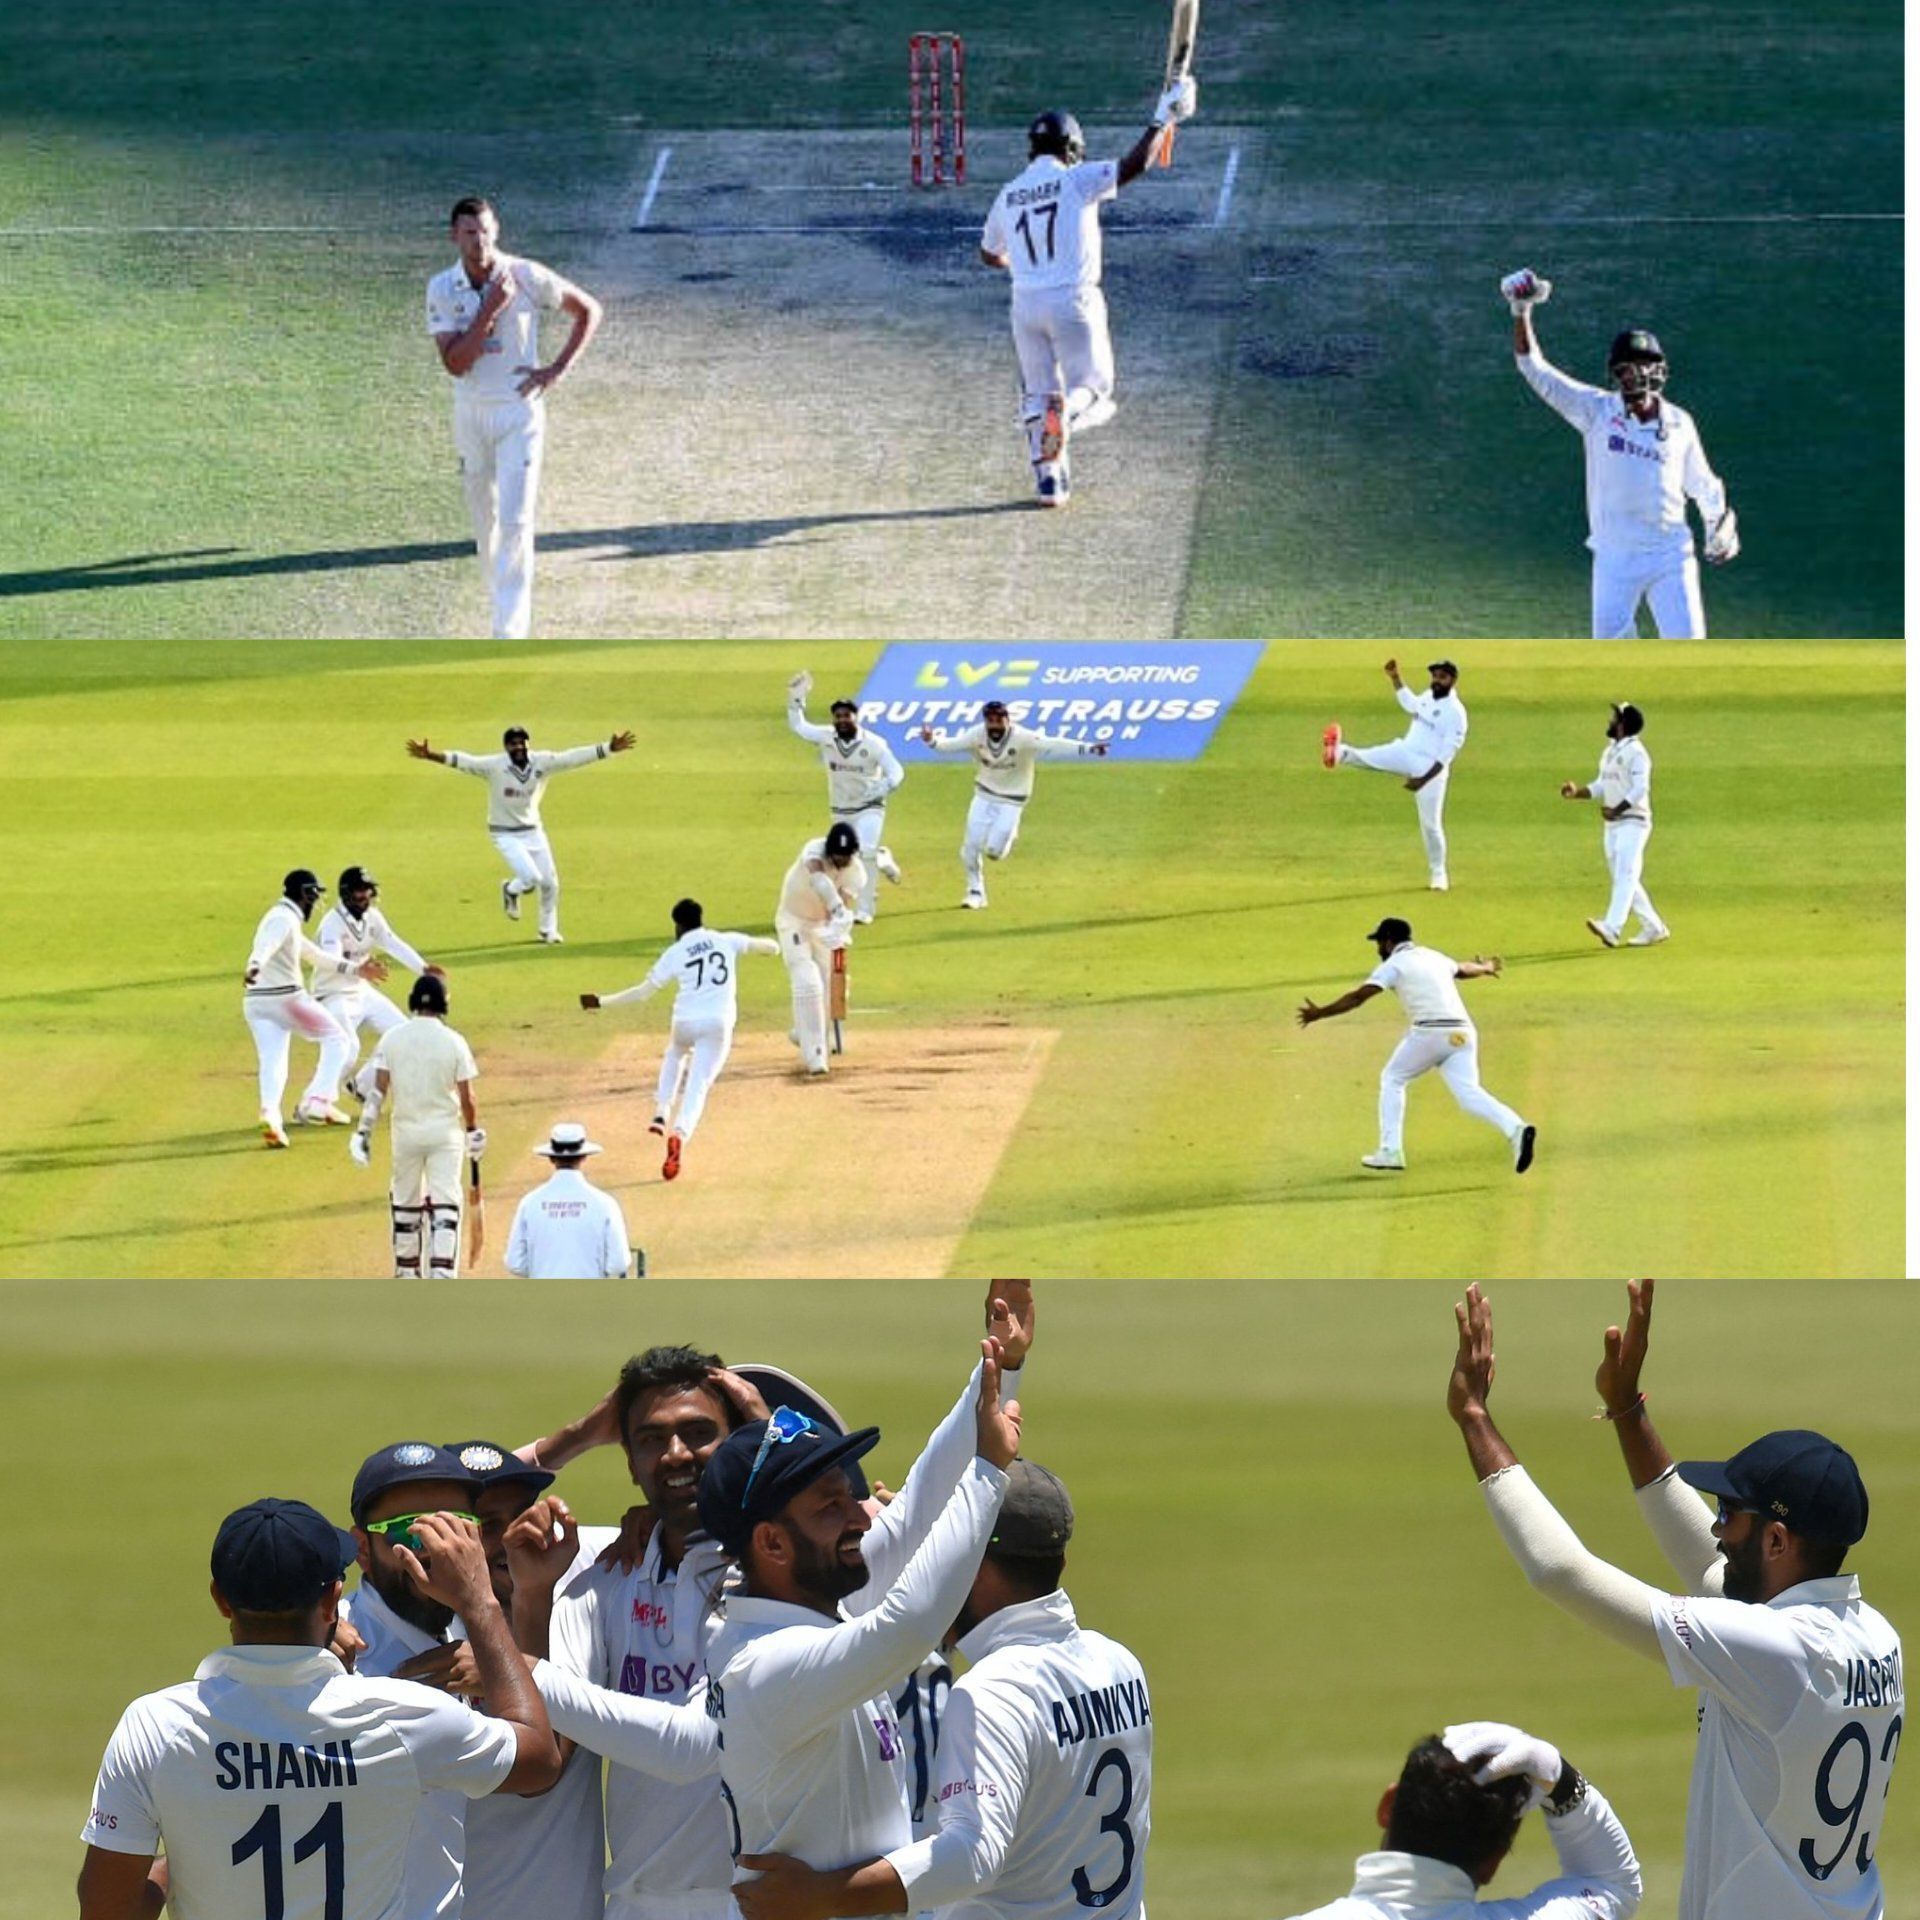 Team India had a fairy-tale year in Test Cricket [Image- Twitter]